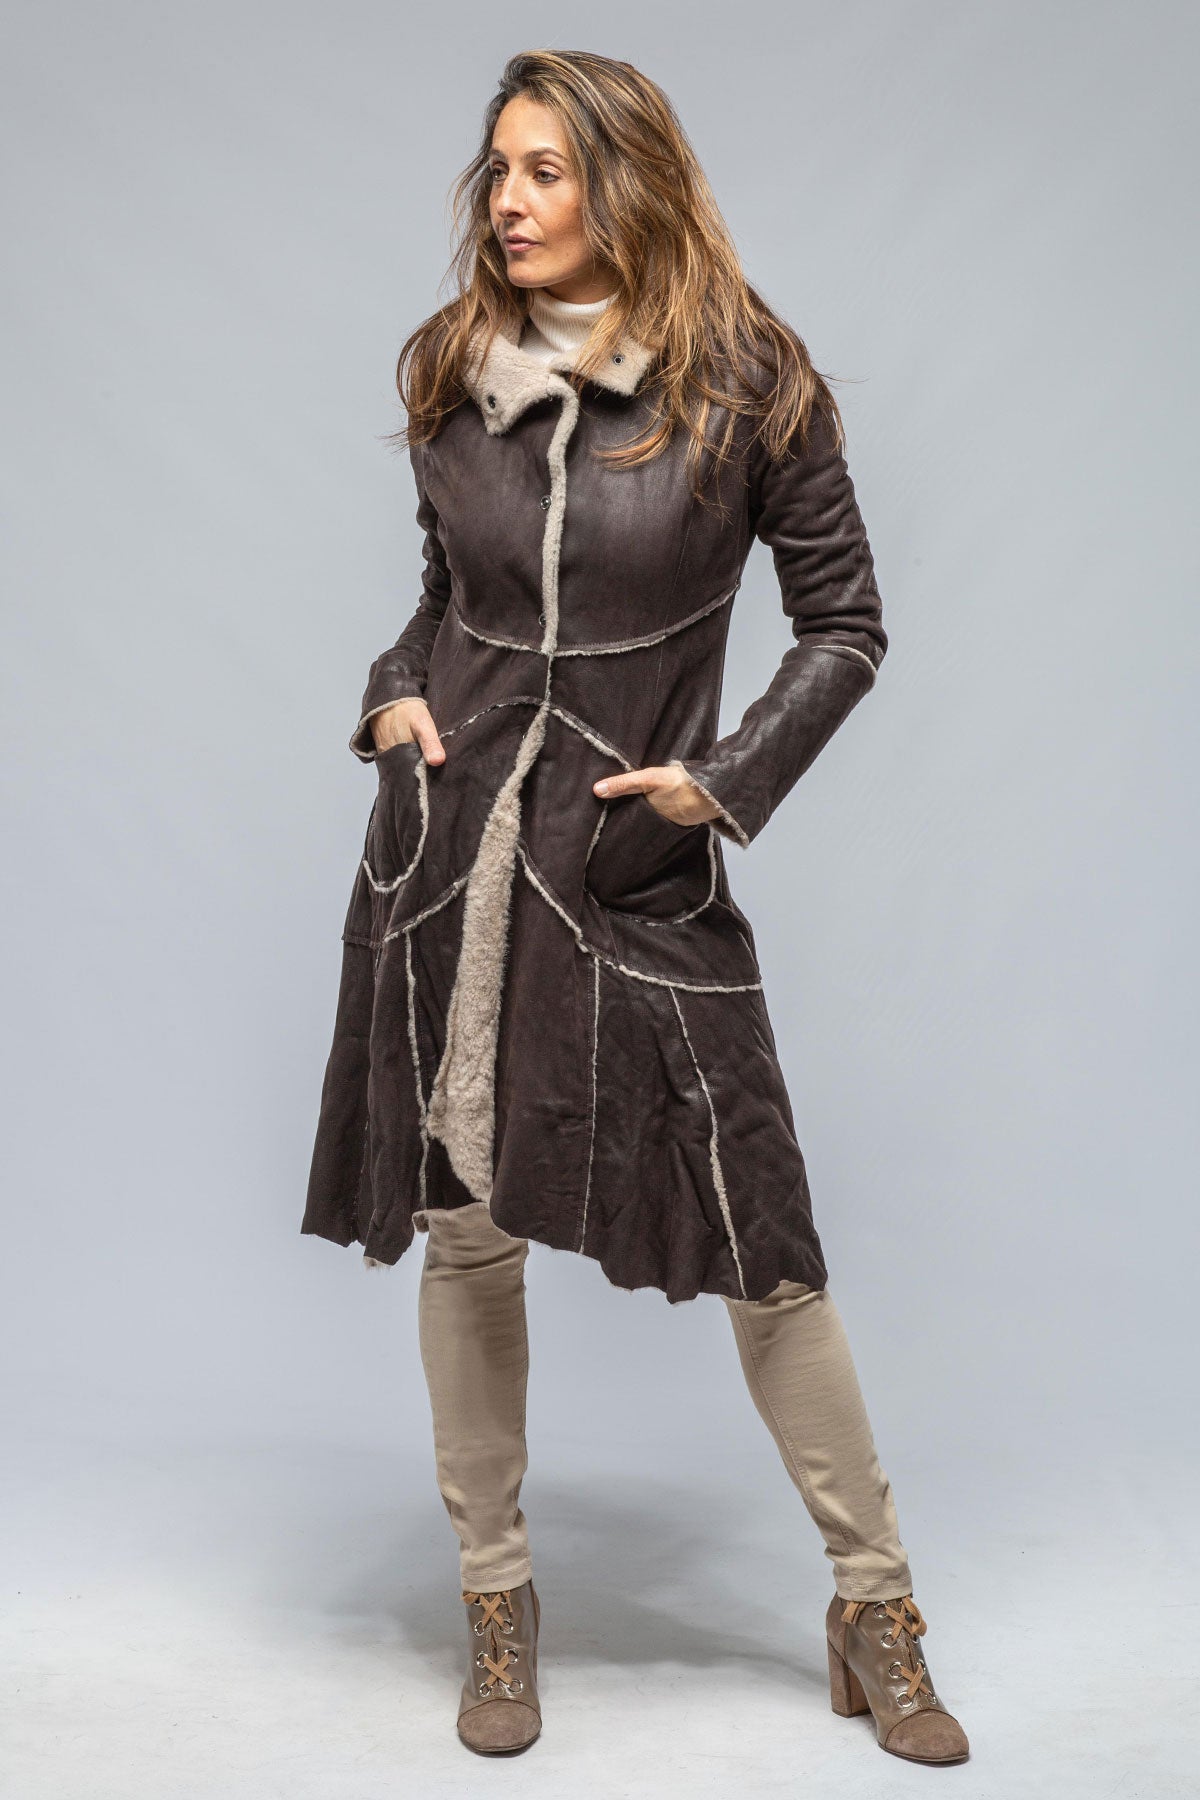 Nevica A-Line Hooded Shearling In Beige | Ladies - Outerwear - Shearling | Roncarati